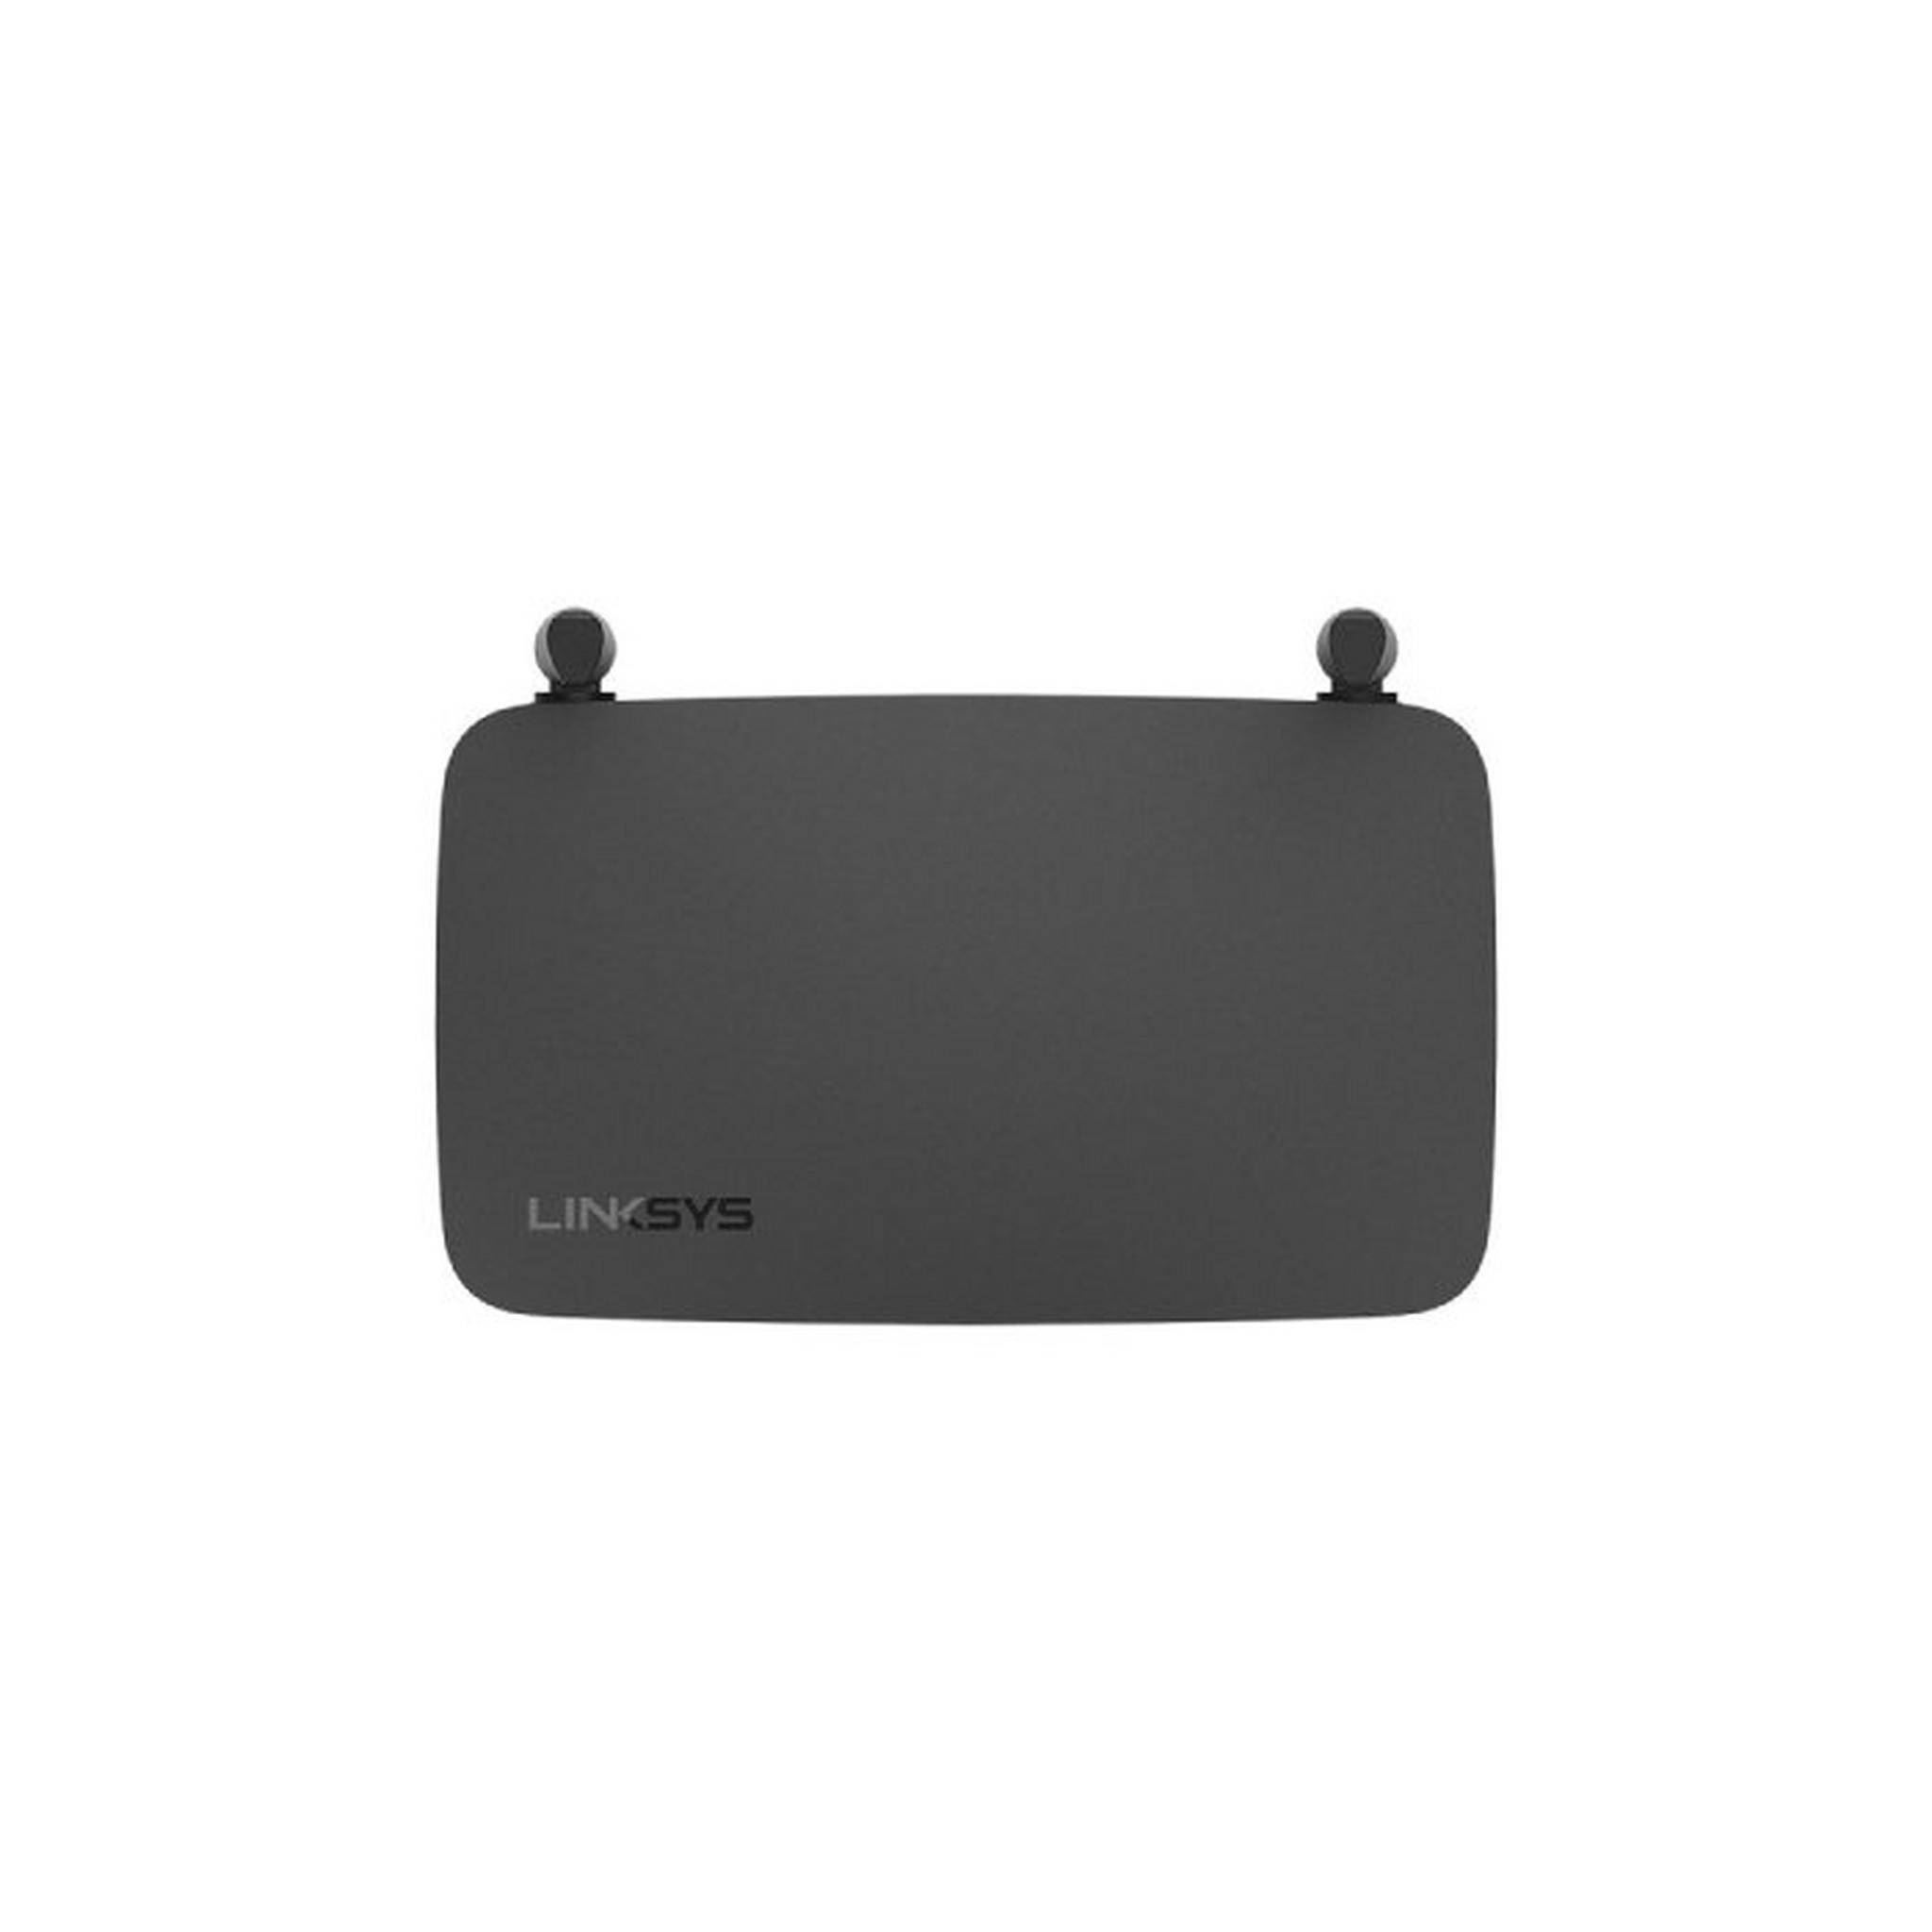 Linksys WiFi Router Dual-Band (E5400 AC1200)